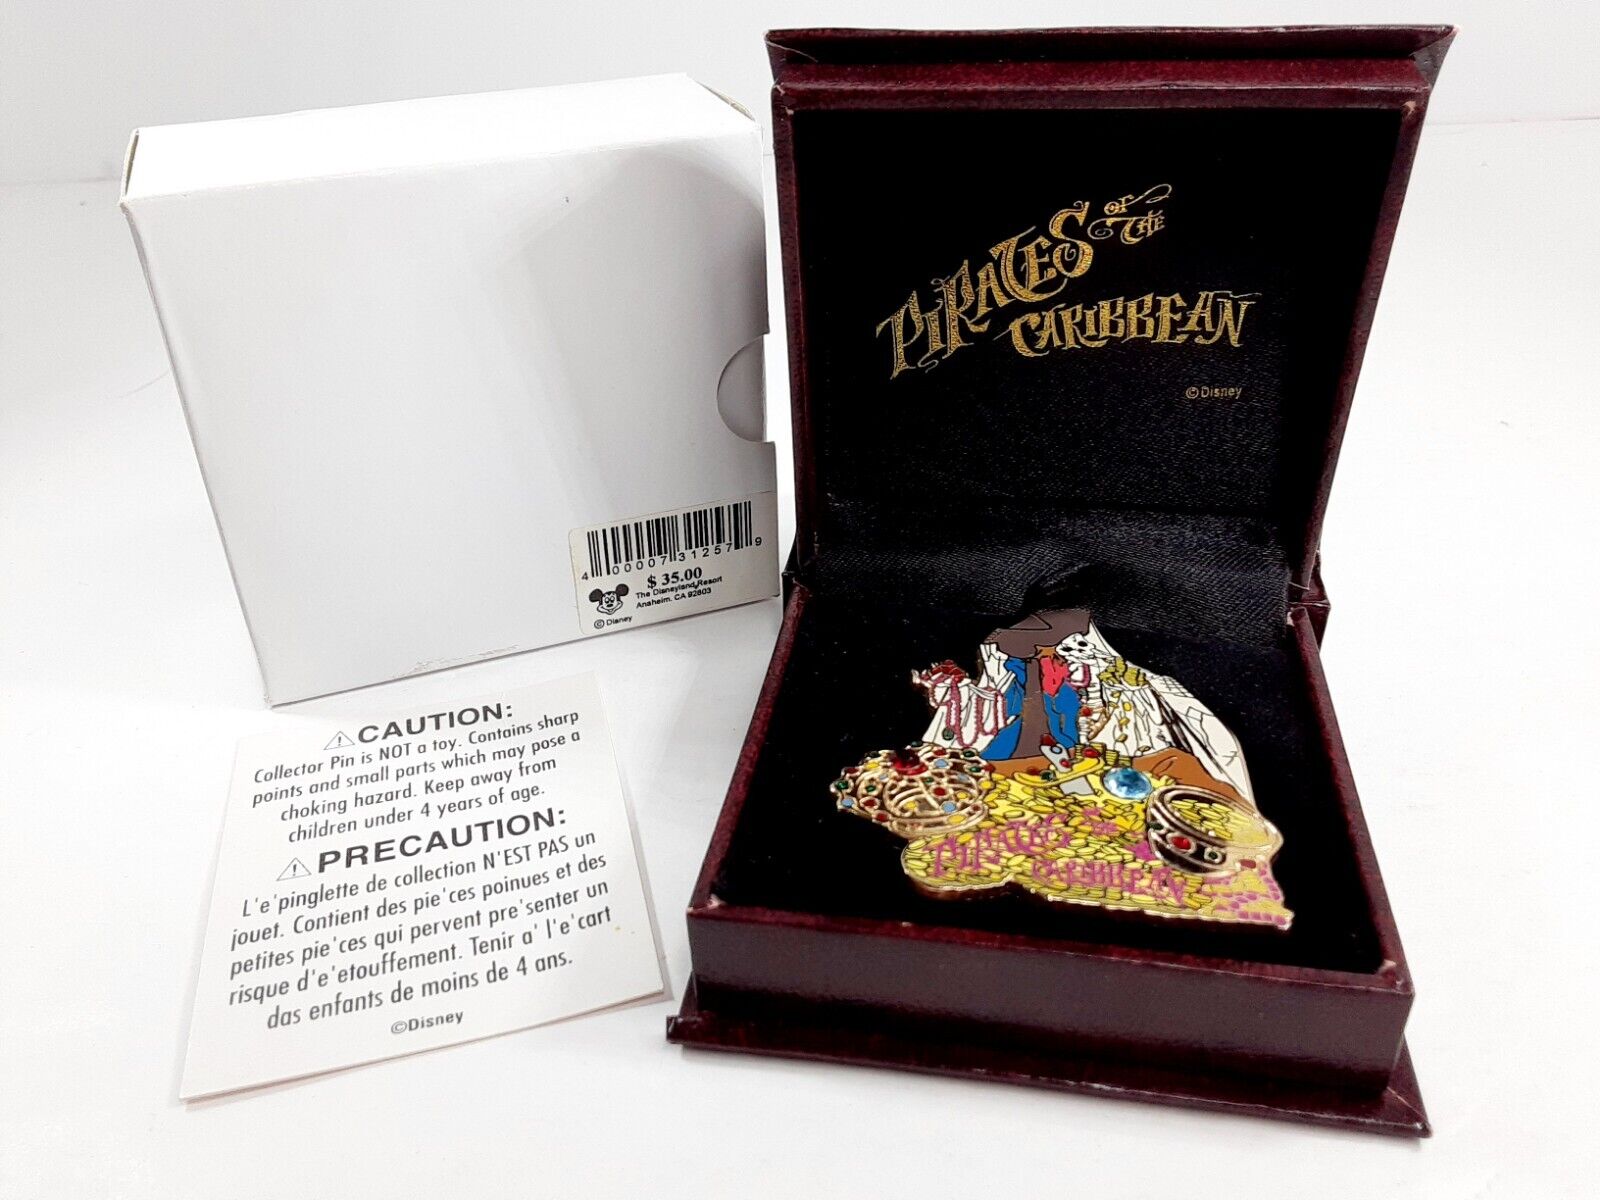 2003 Dlr Pirates Of The Caribbean Skeleton Pirate Gold & Jewels Pin 22649 Le300